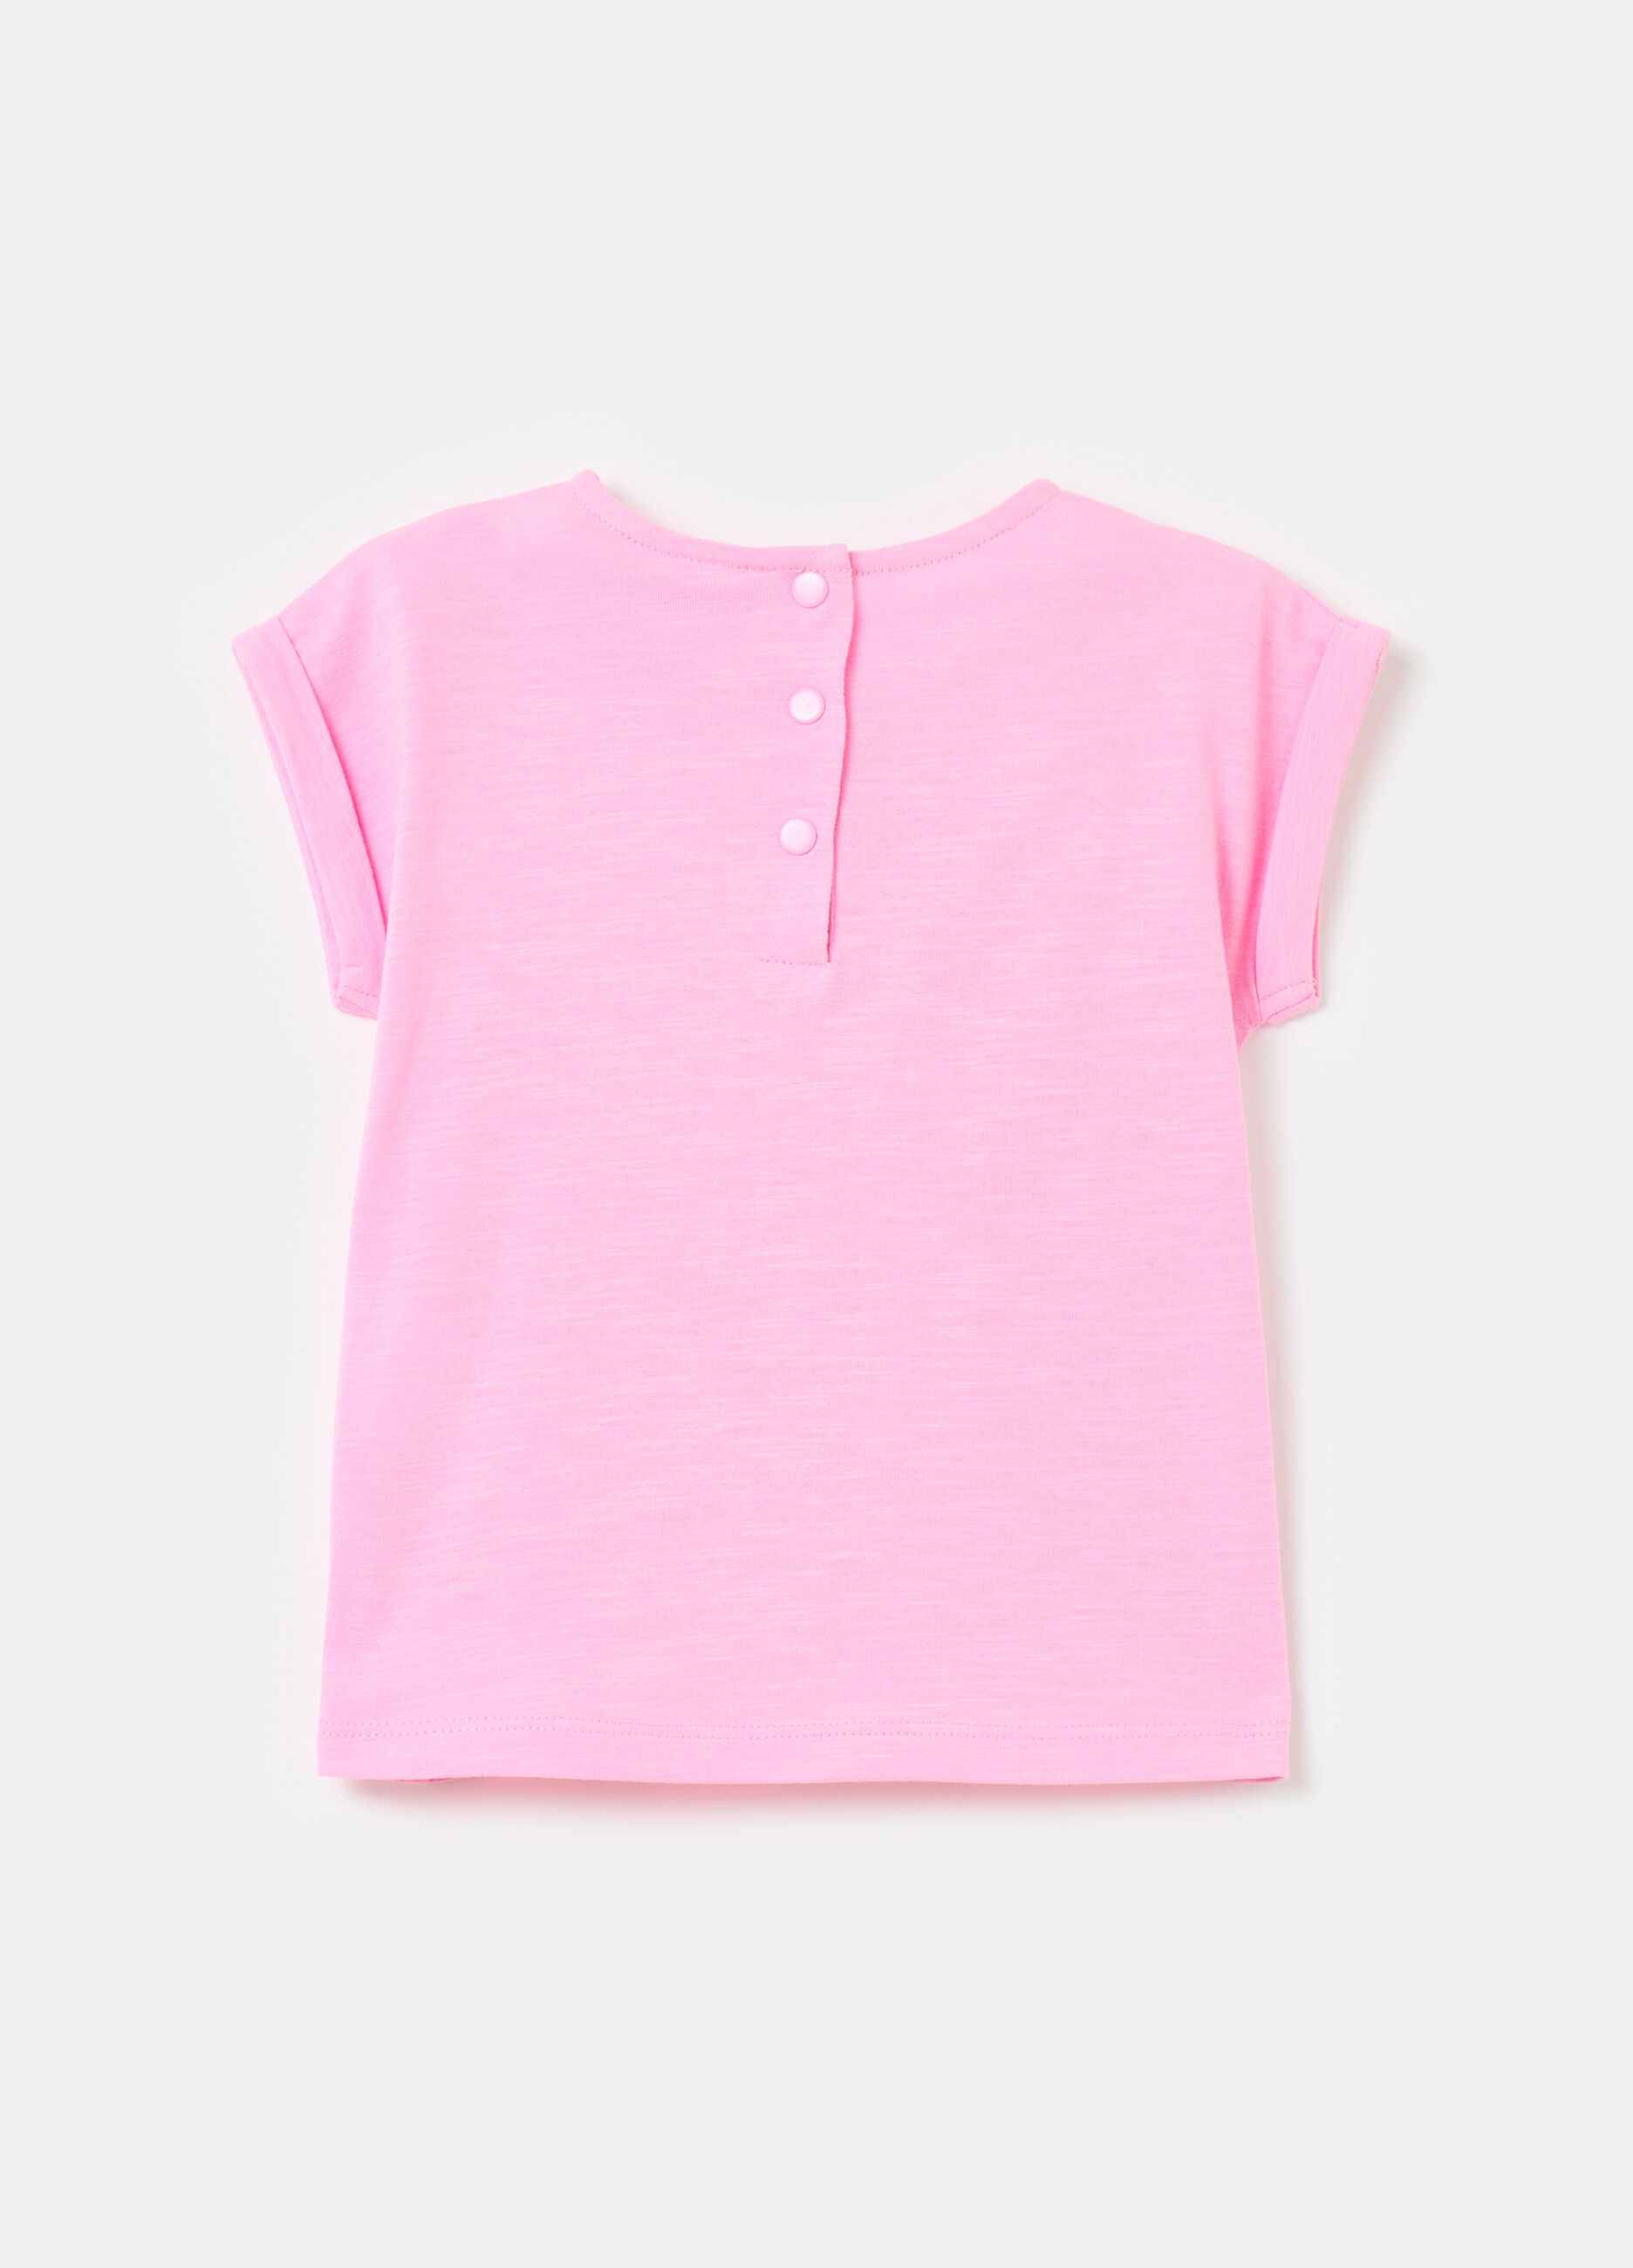 Cotton T-shirt with broderie anglaise insert